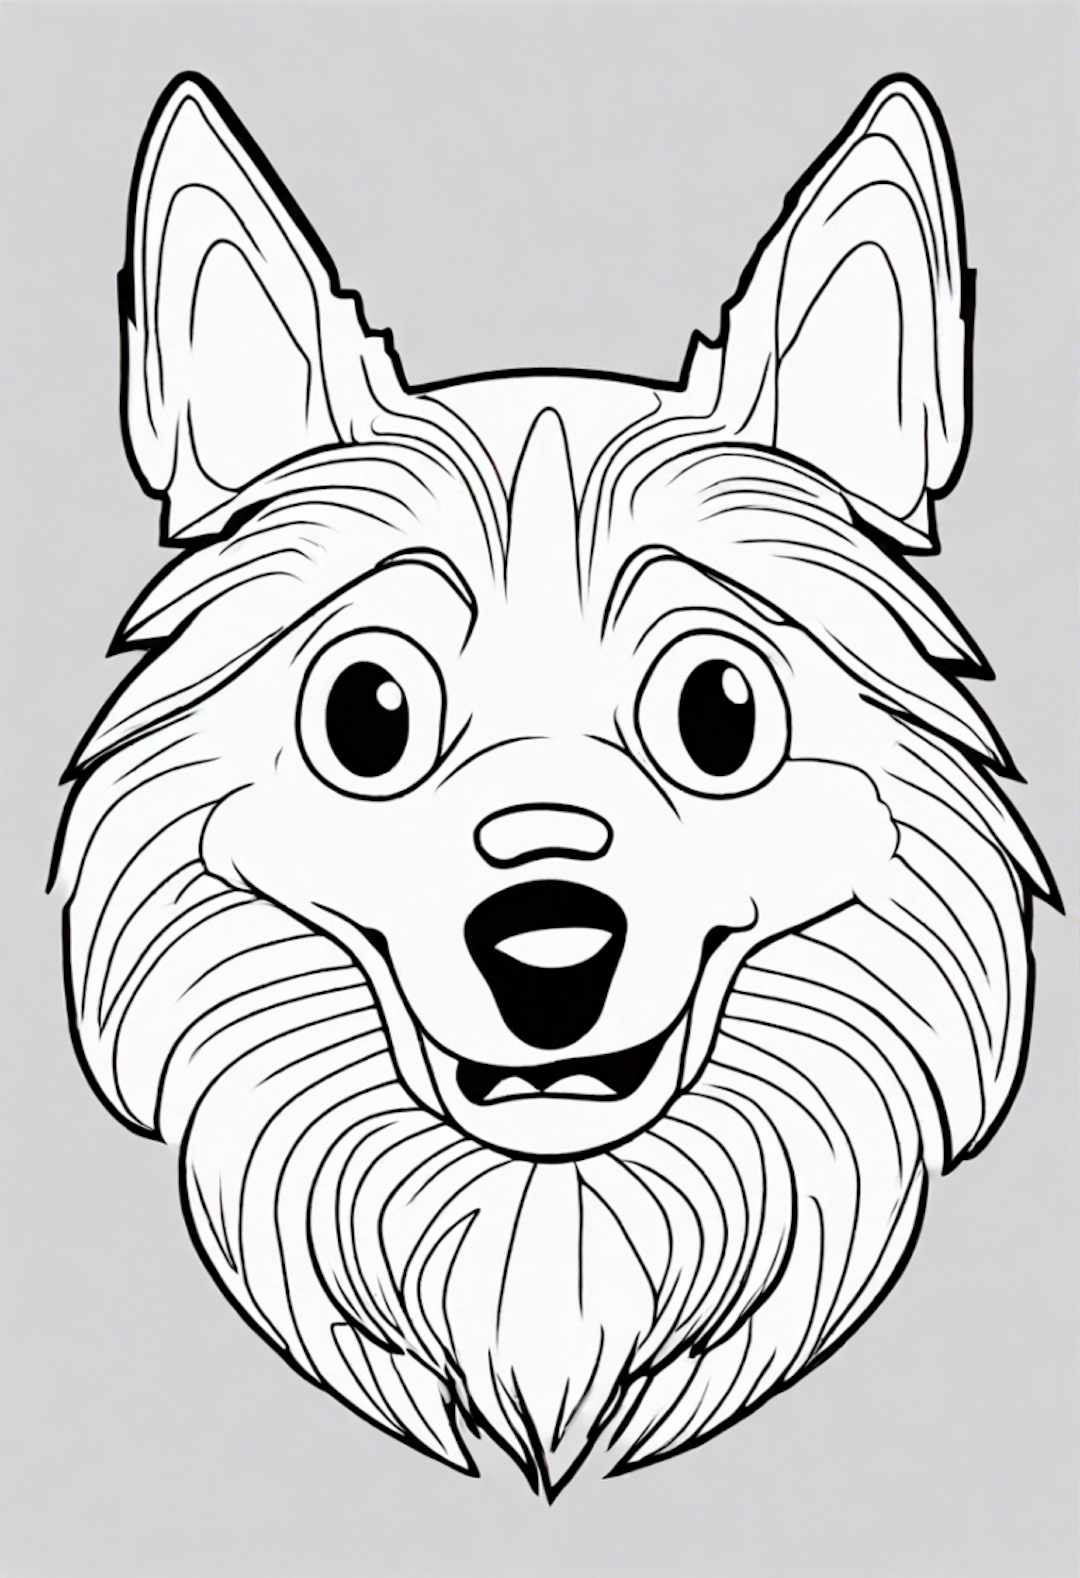 Bluey coloring pages